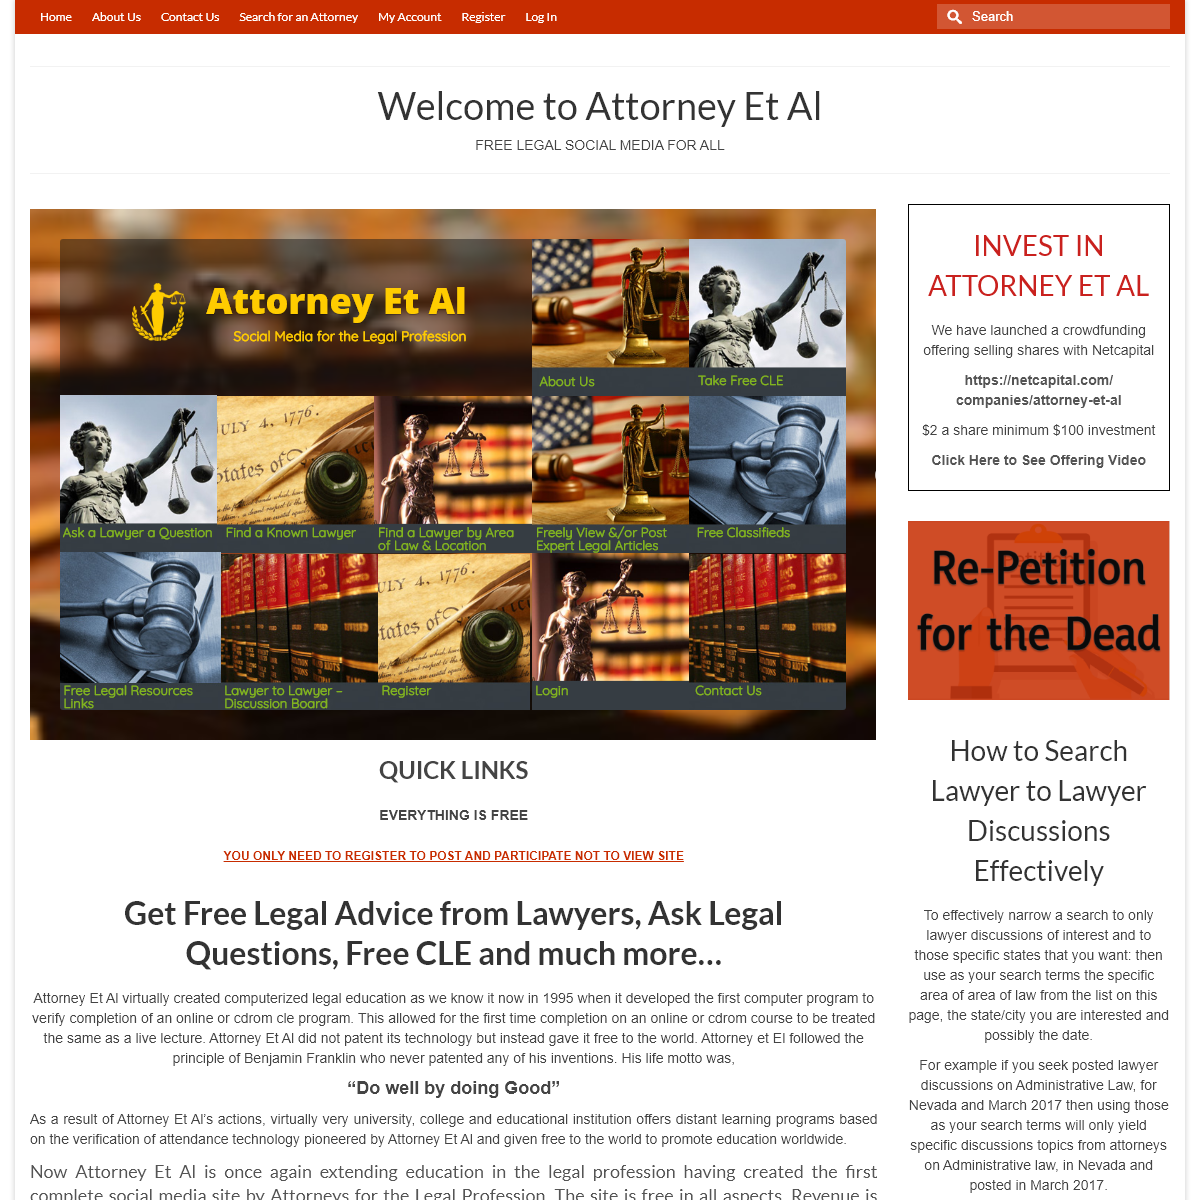 A complete backup of attorneyetal.com